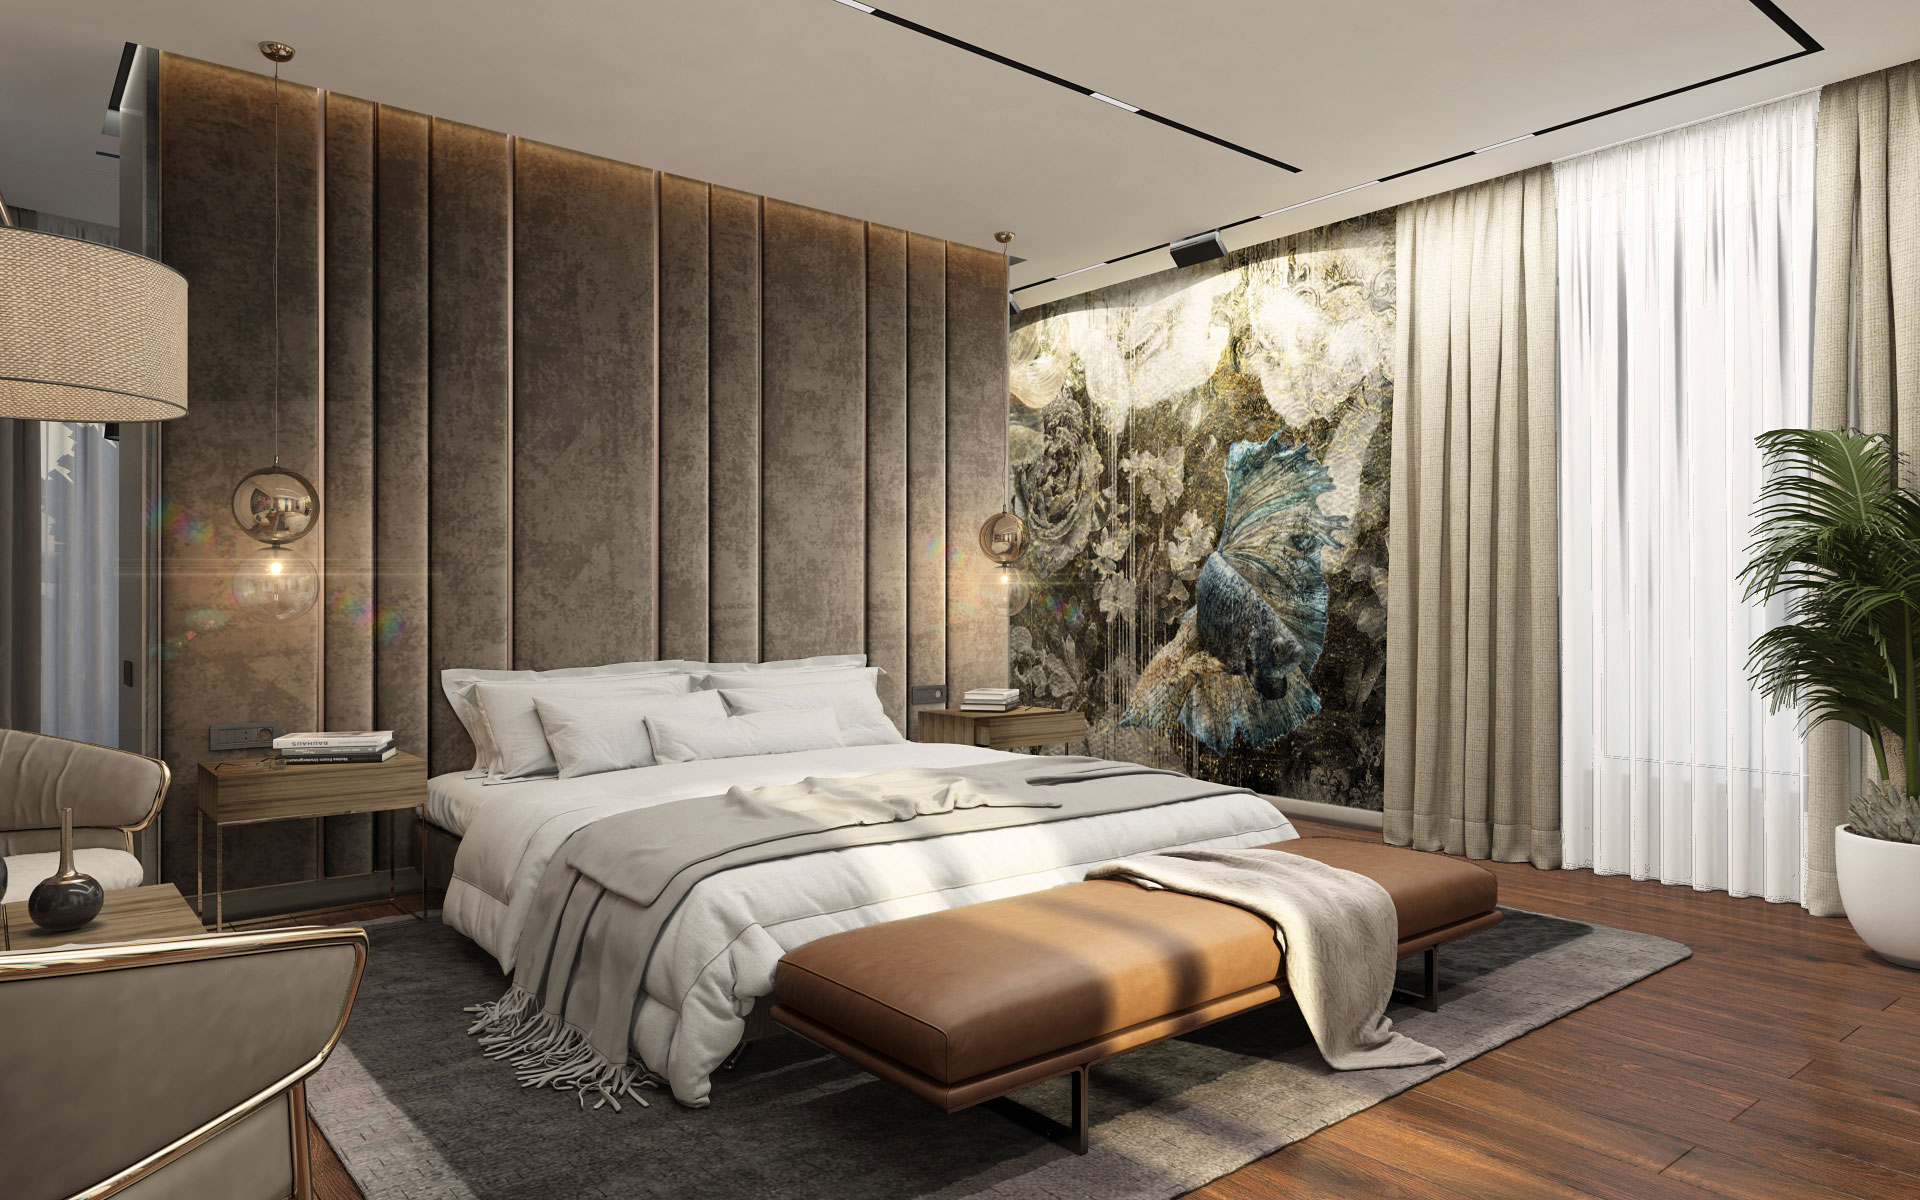 Bedroom design by Architect Team